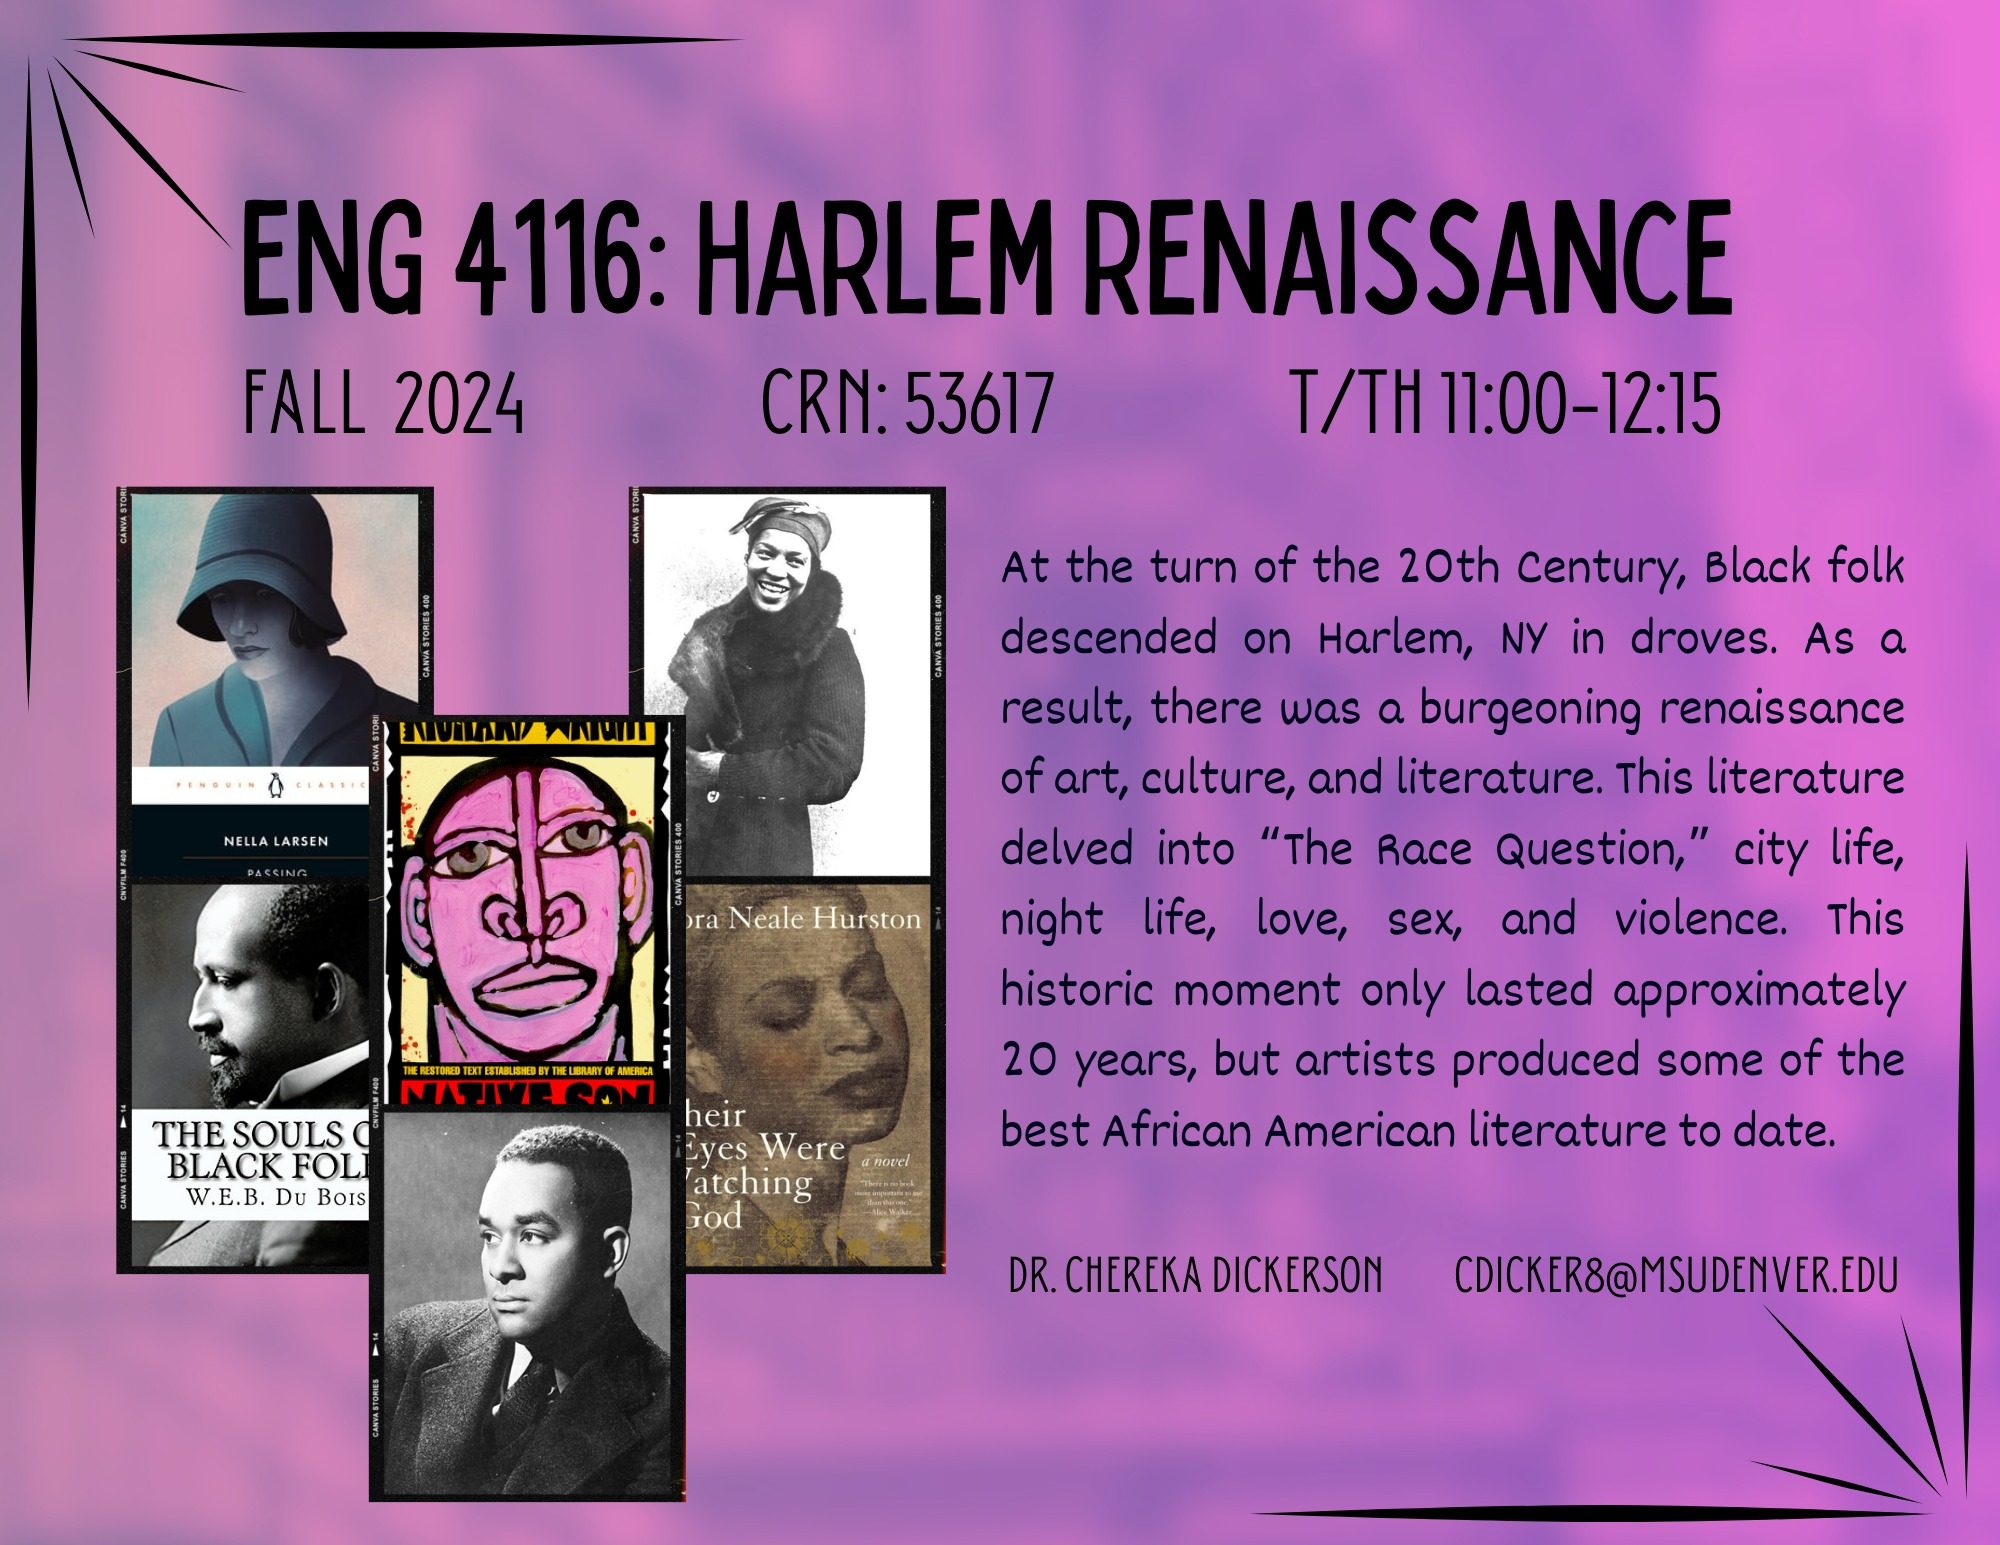 Image shows flyer for an English 4116 course titled 